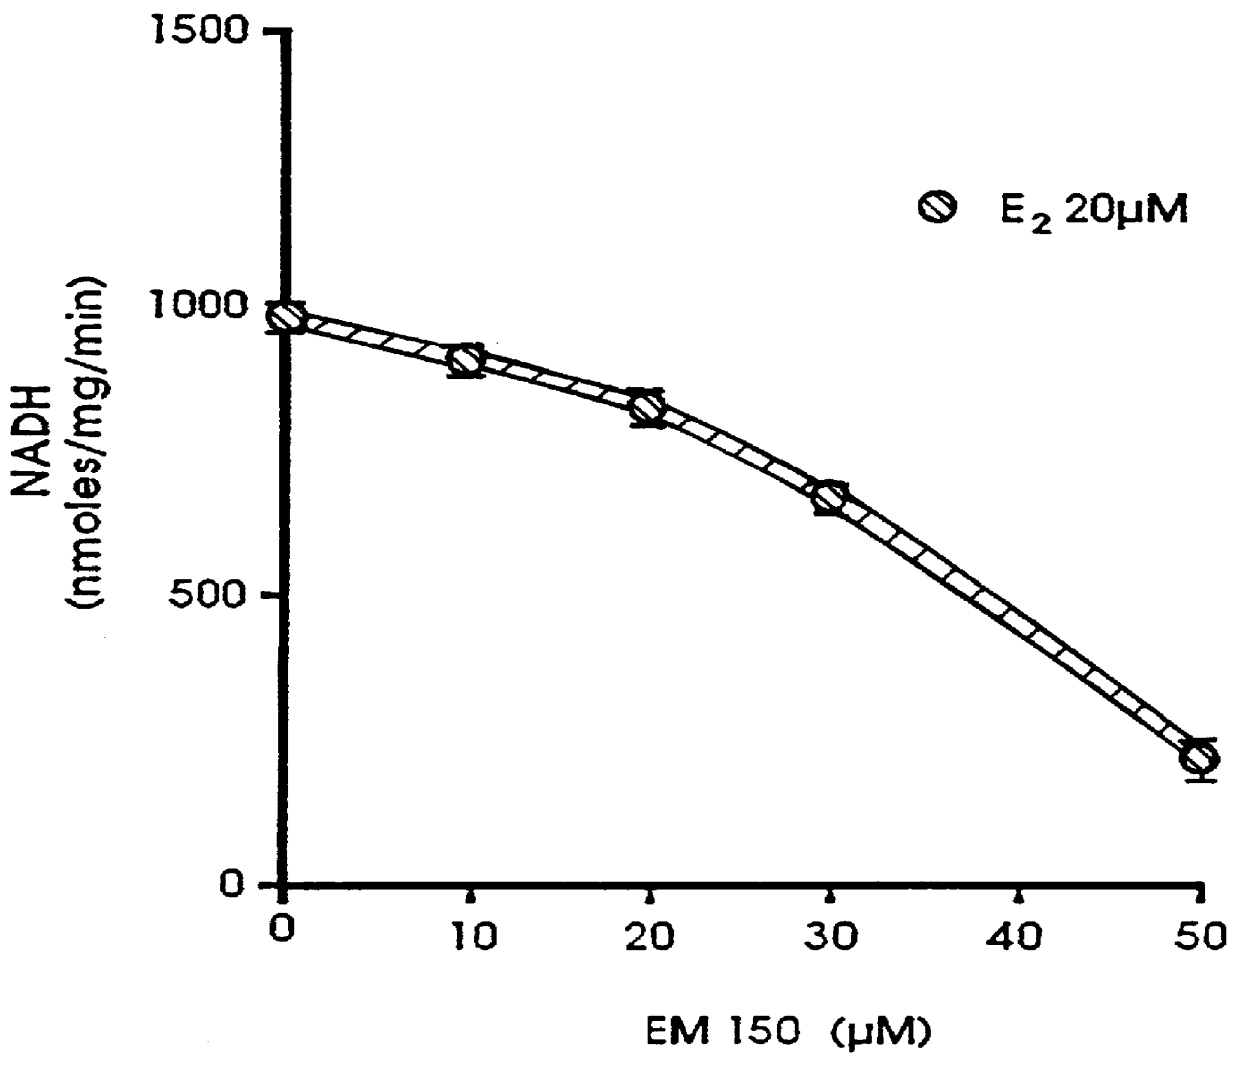 Androgen derivatives for use in the inhibition of sex steroid activity